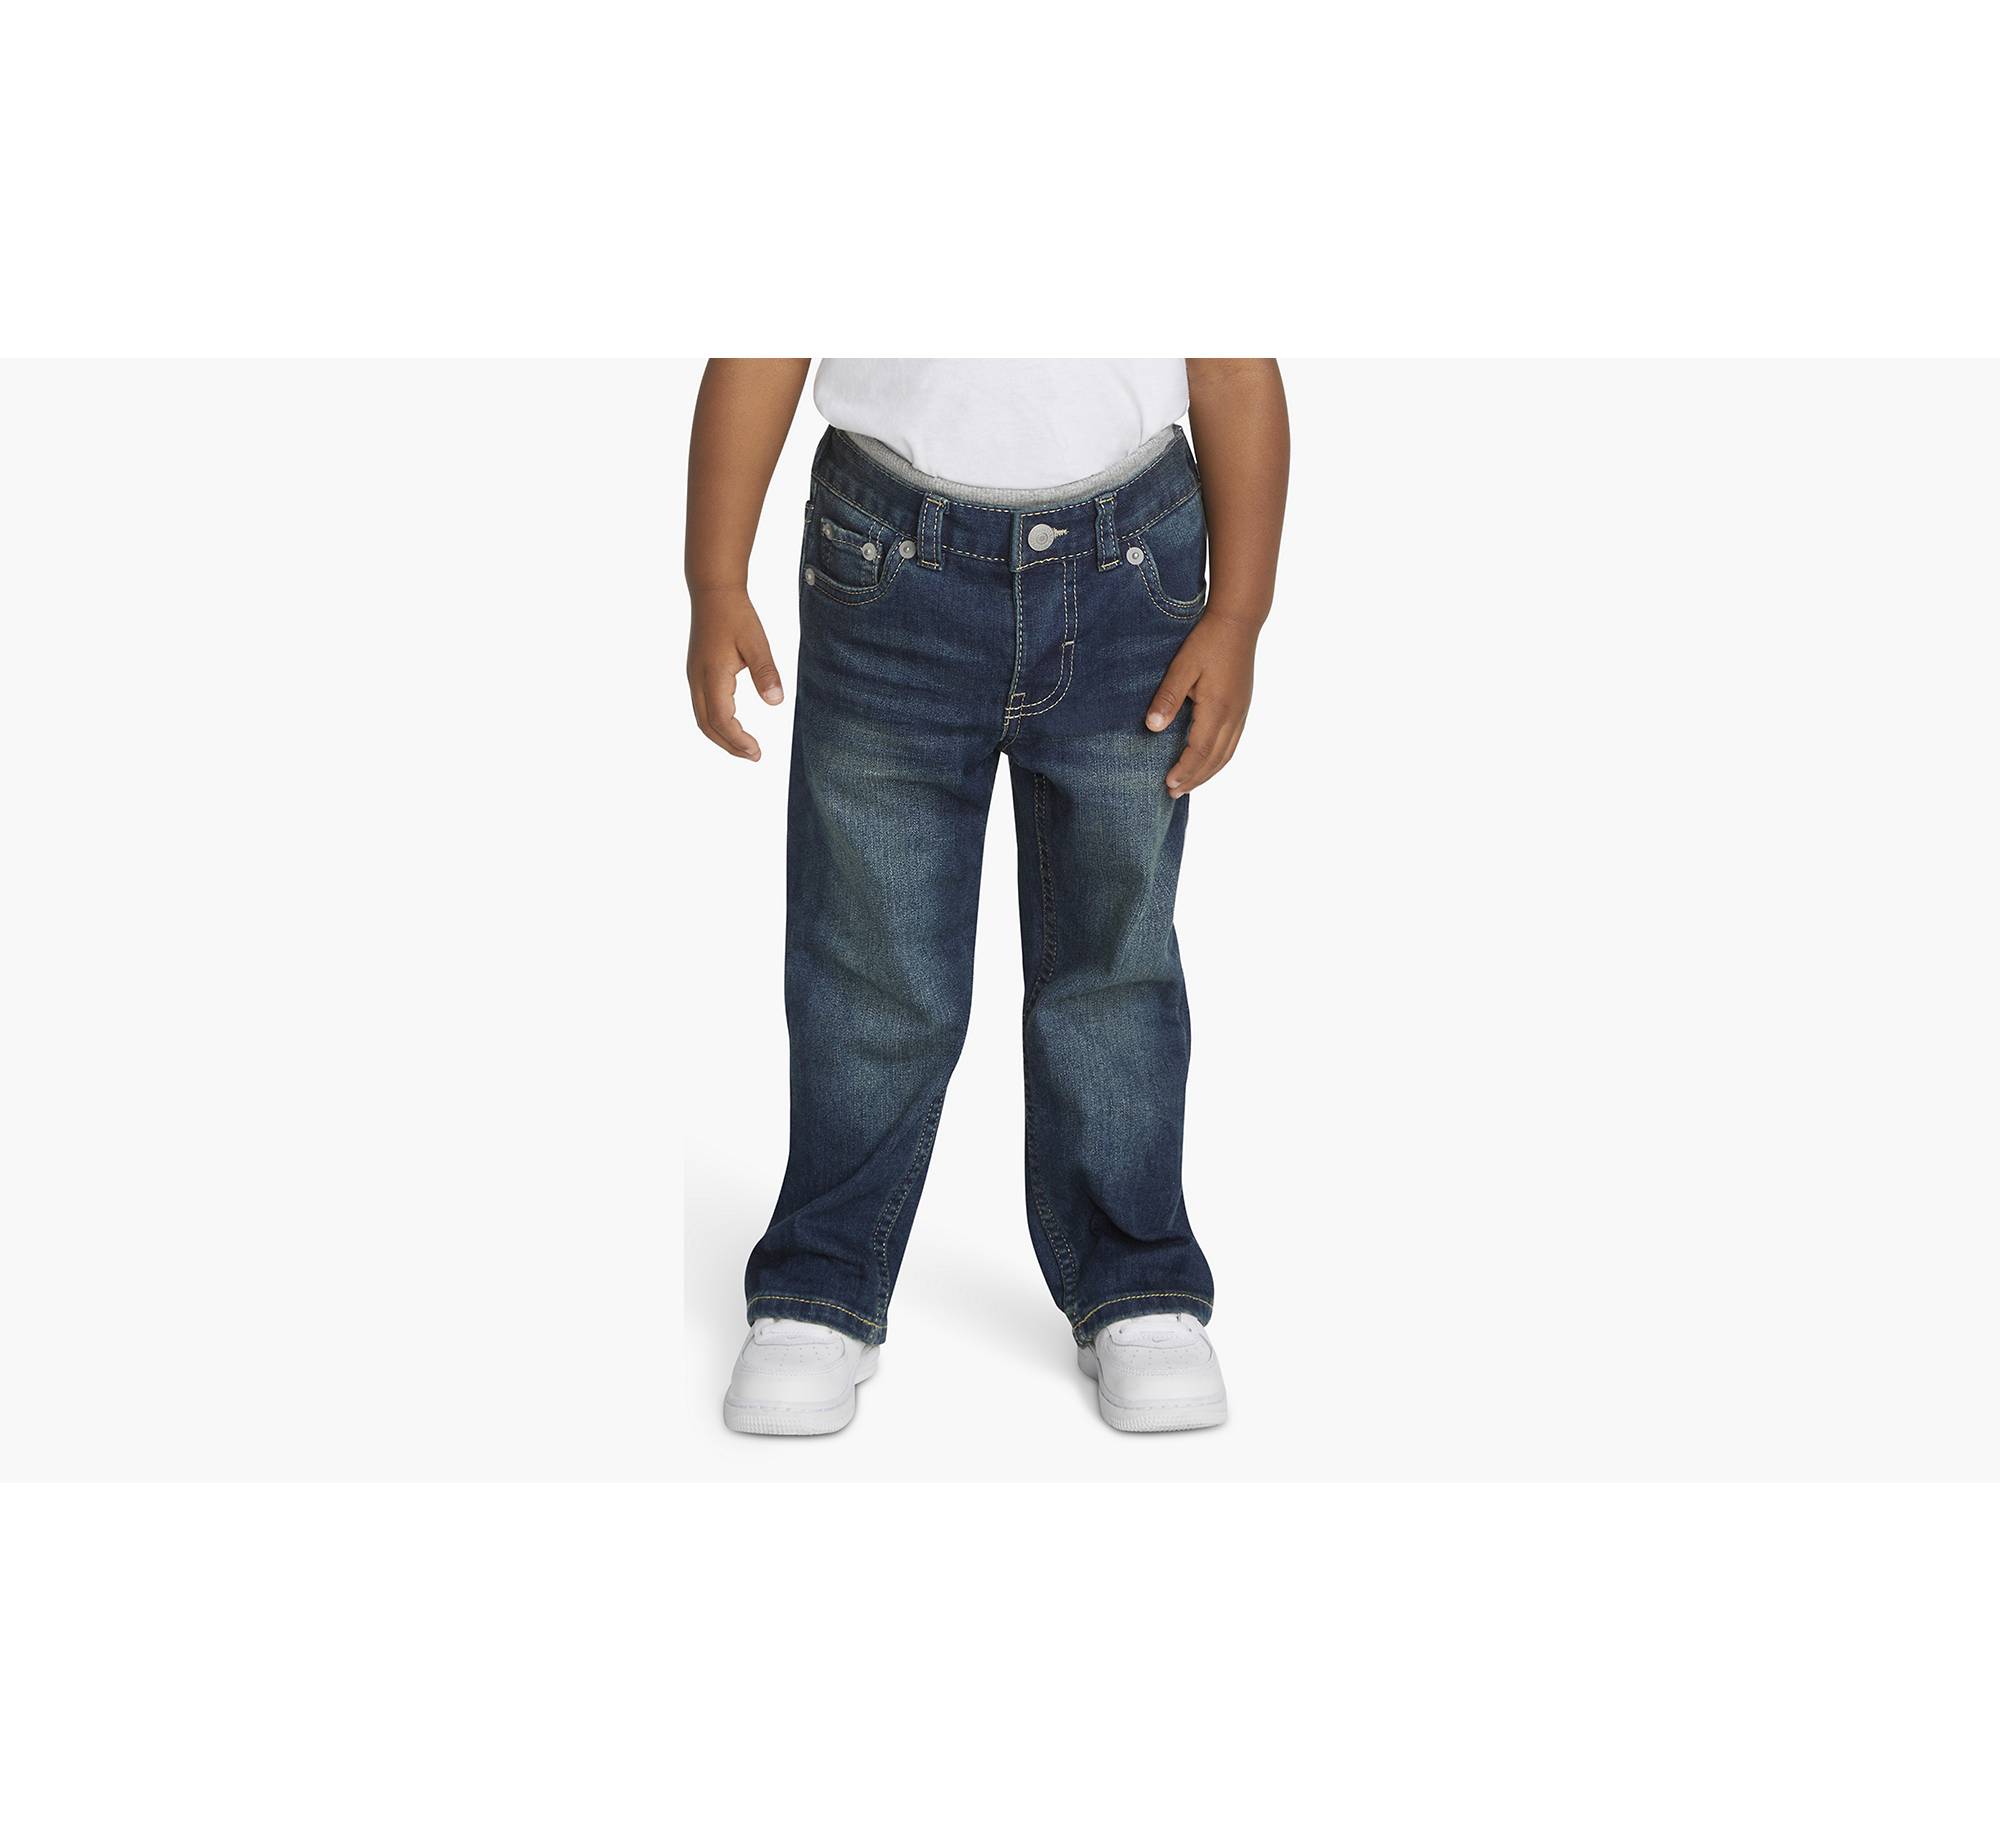 Murphy Pull On Straight Fit Jeans Toddler Boys 2T-4T 1